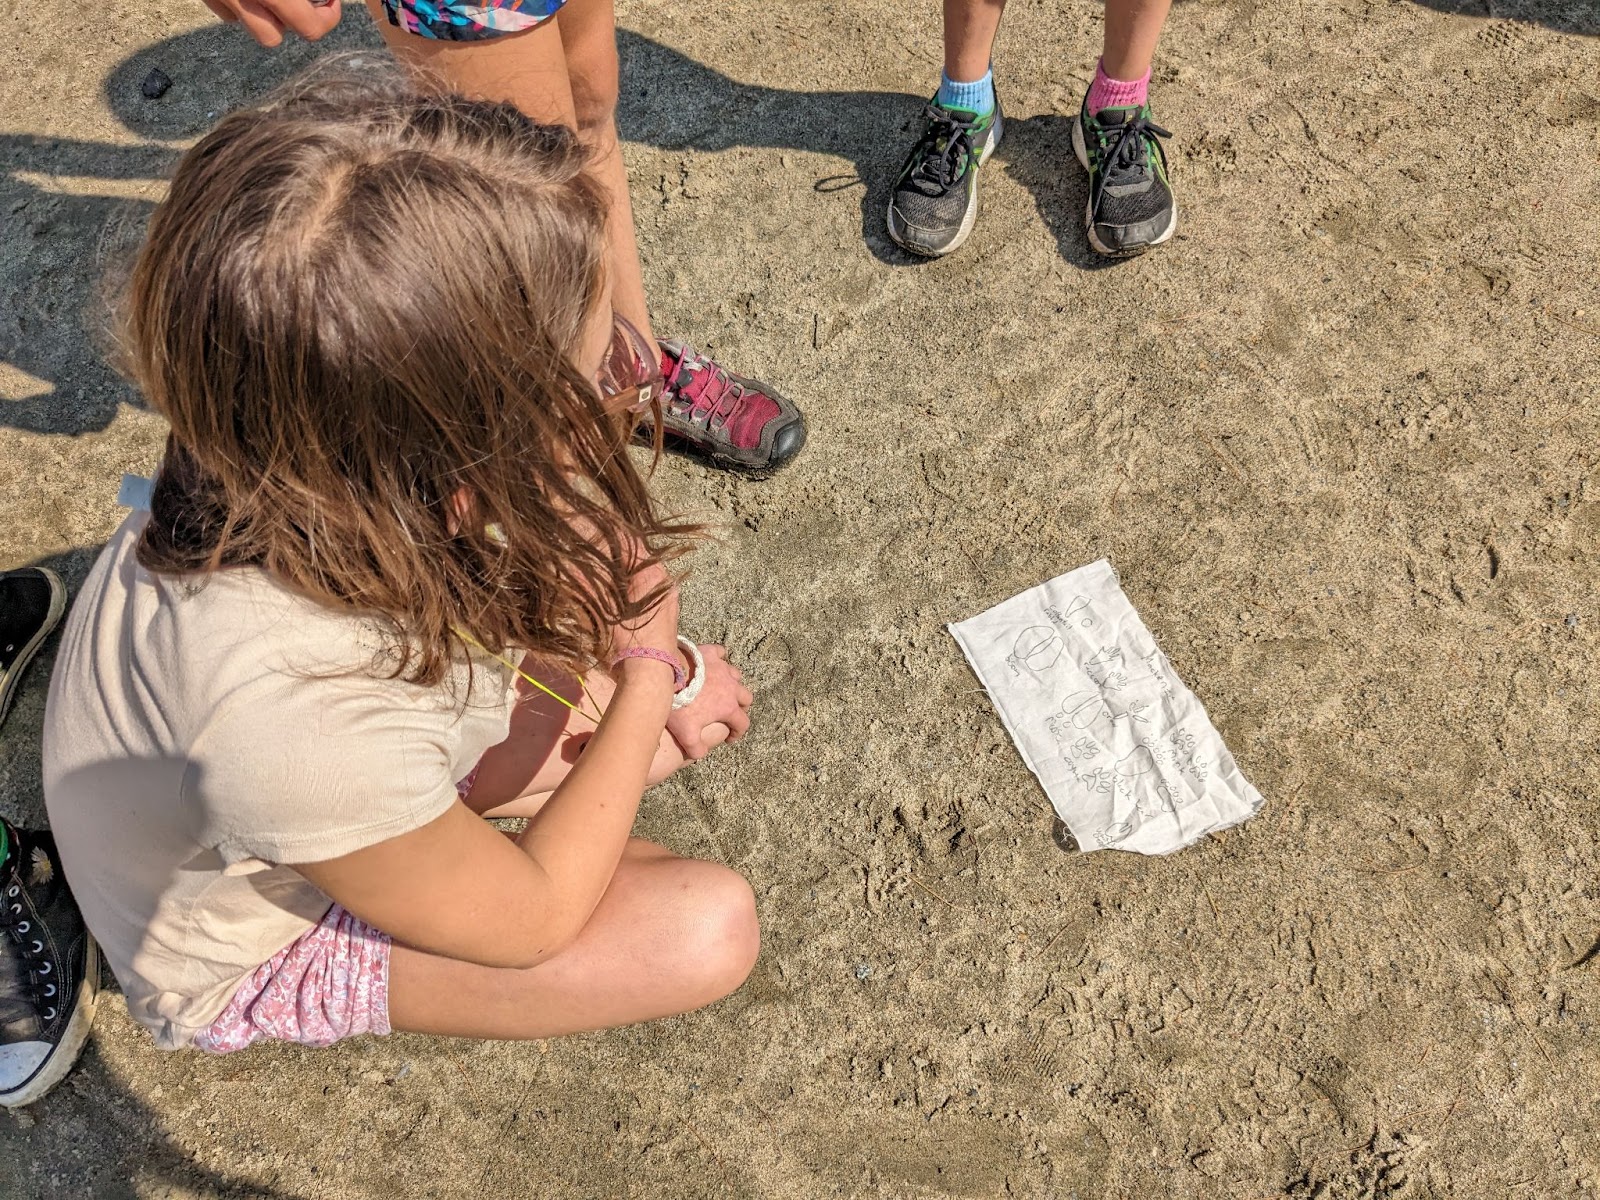 One kid kneeling infant of piece of paper laying on sand at Storrs Pond surrounded by other kids